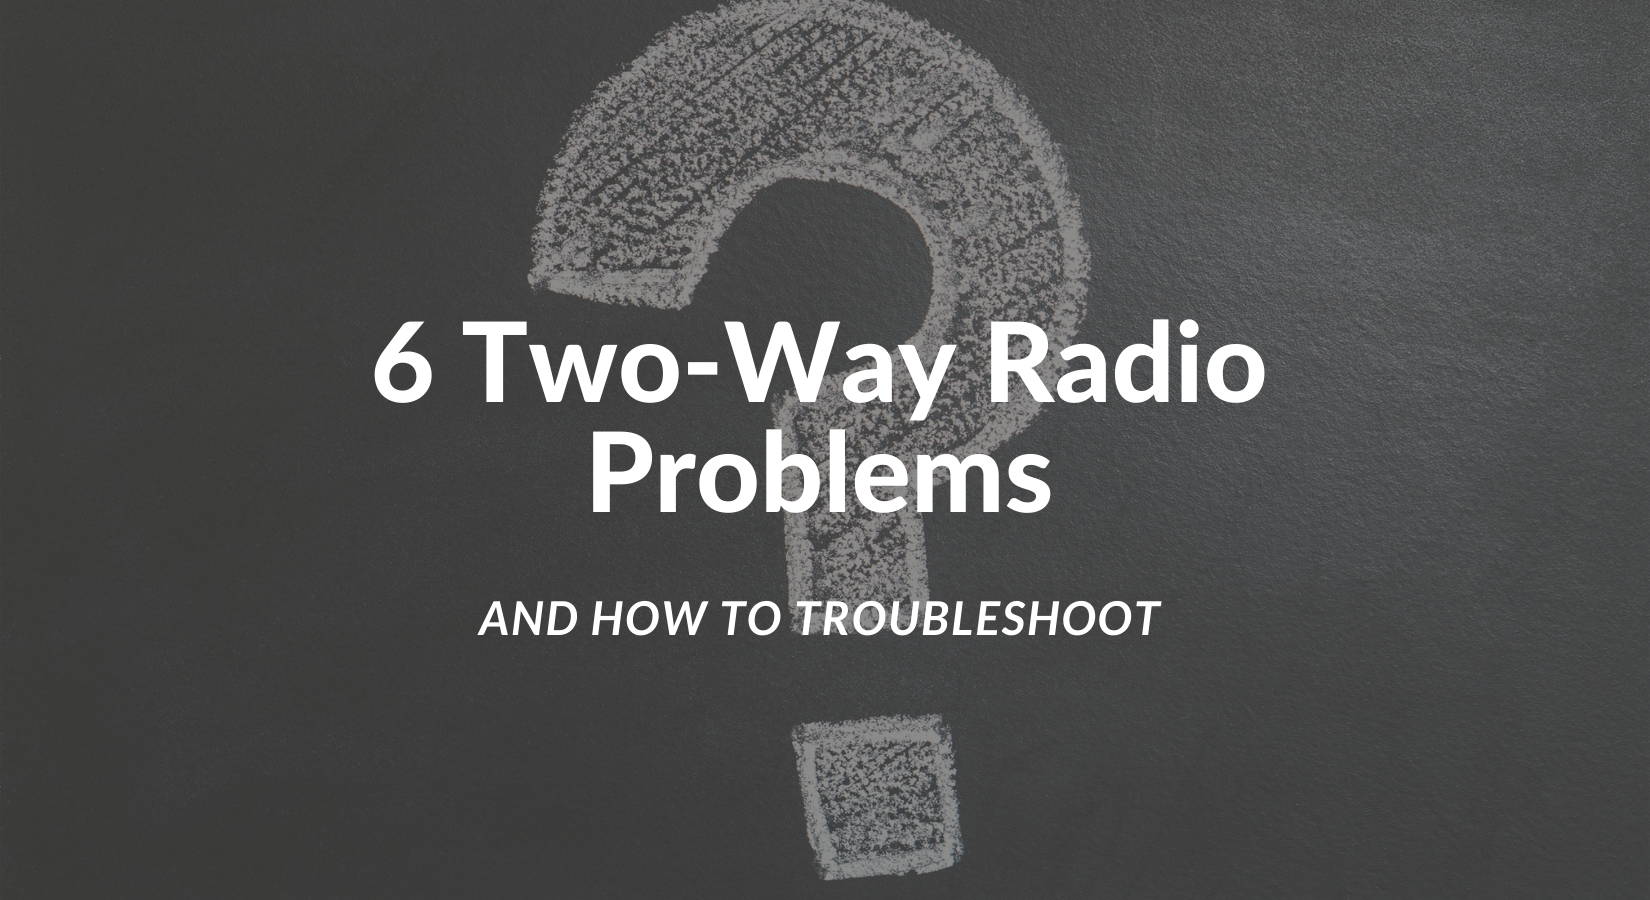 Two-Way Radio Problems and How to Fix Them